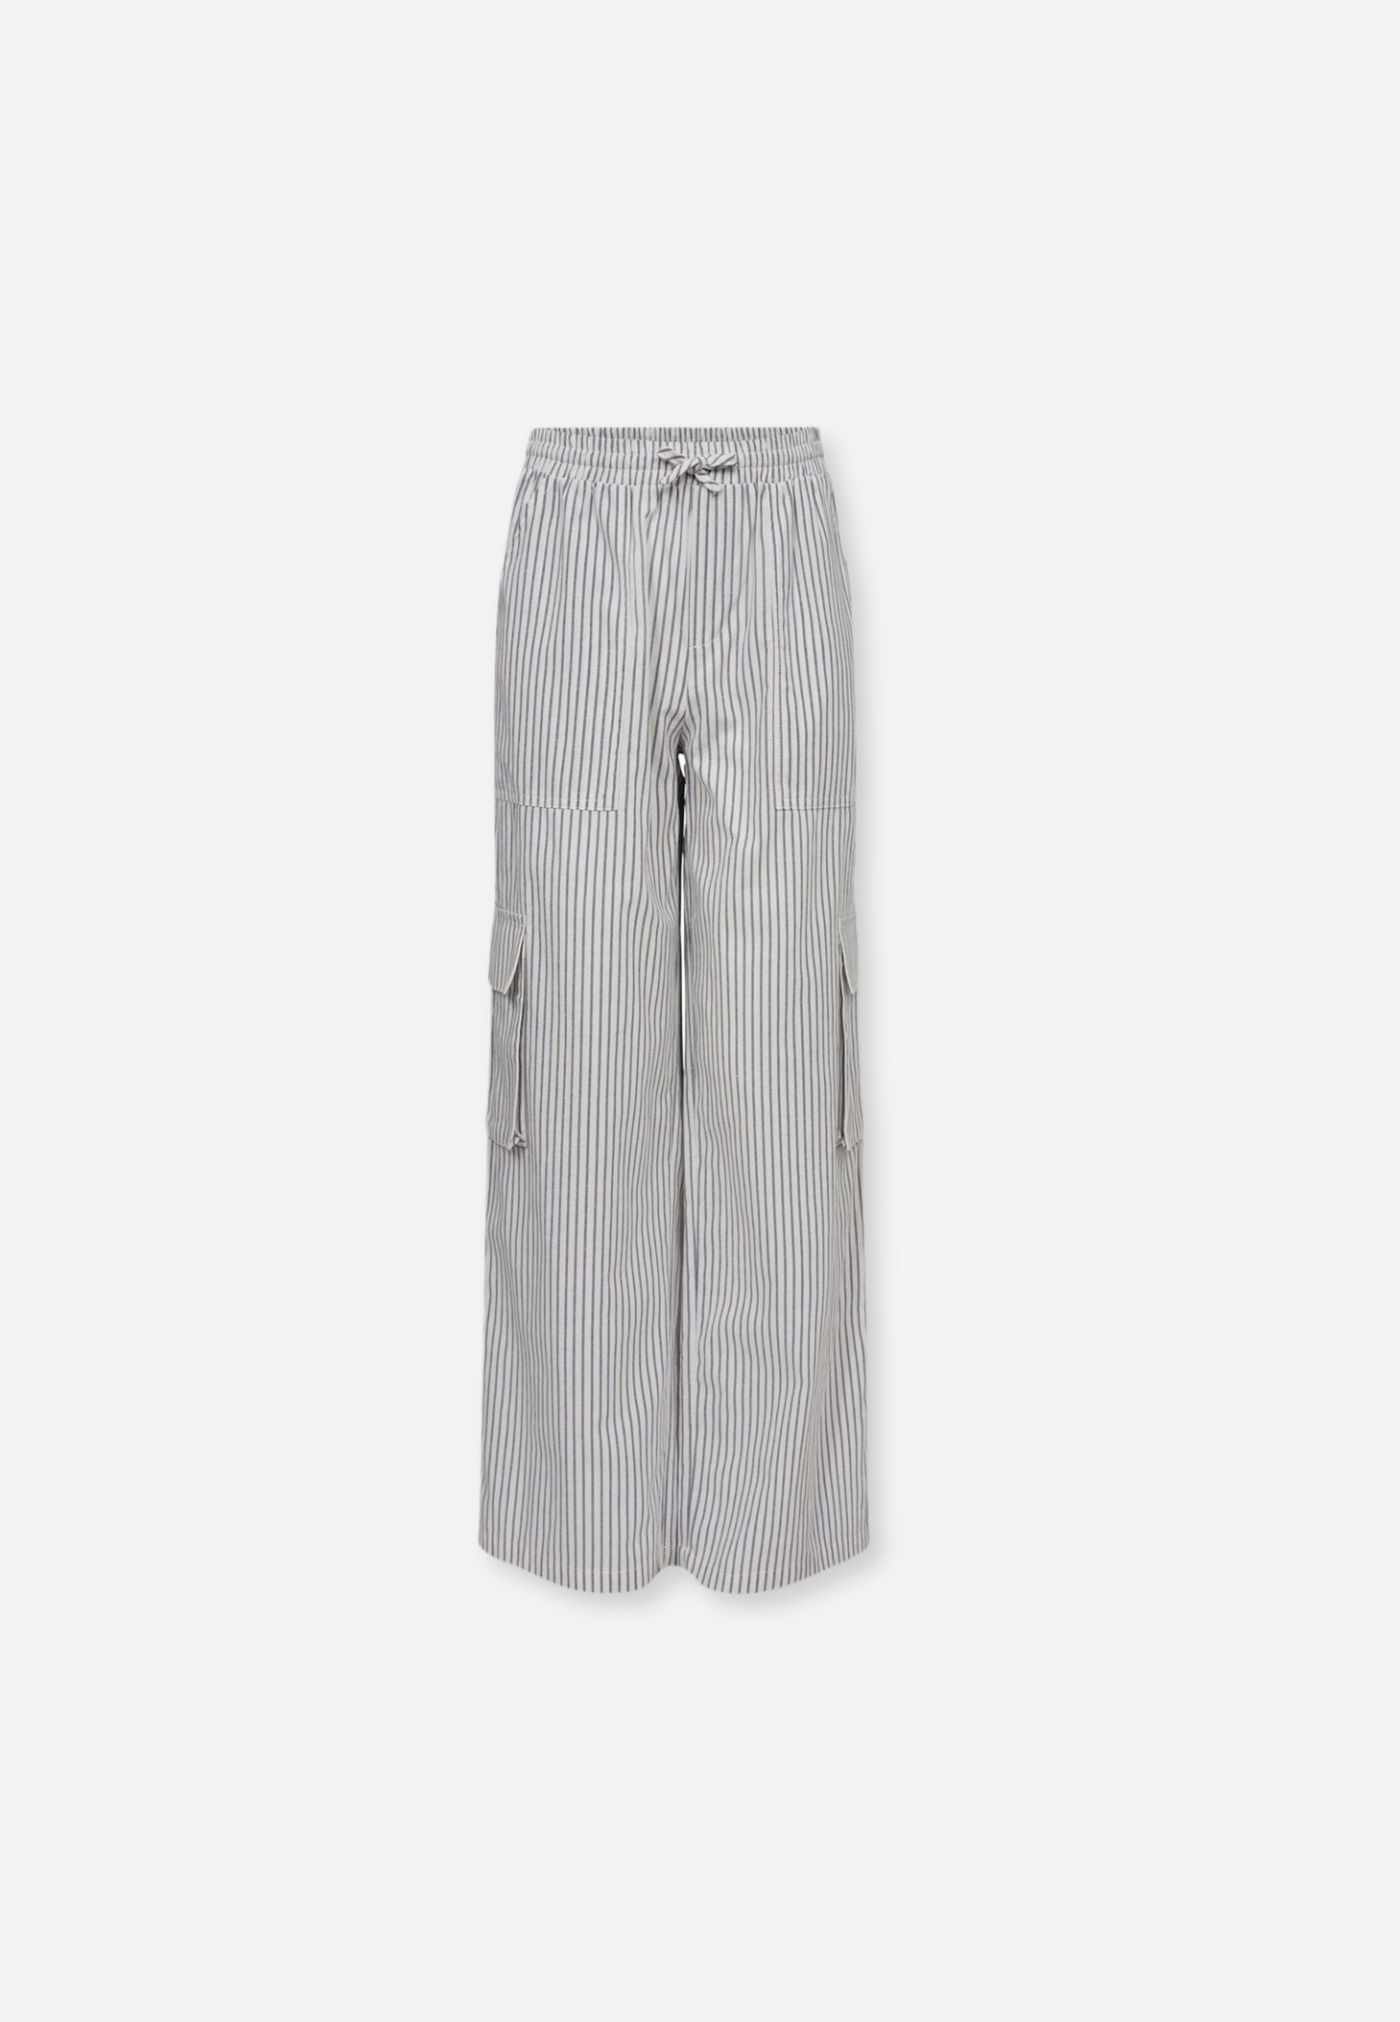 TROUSERS - BLUE STRIPED